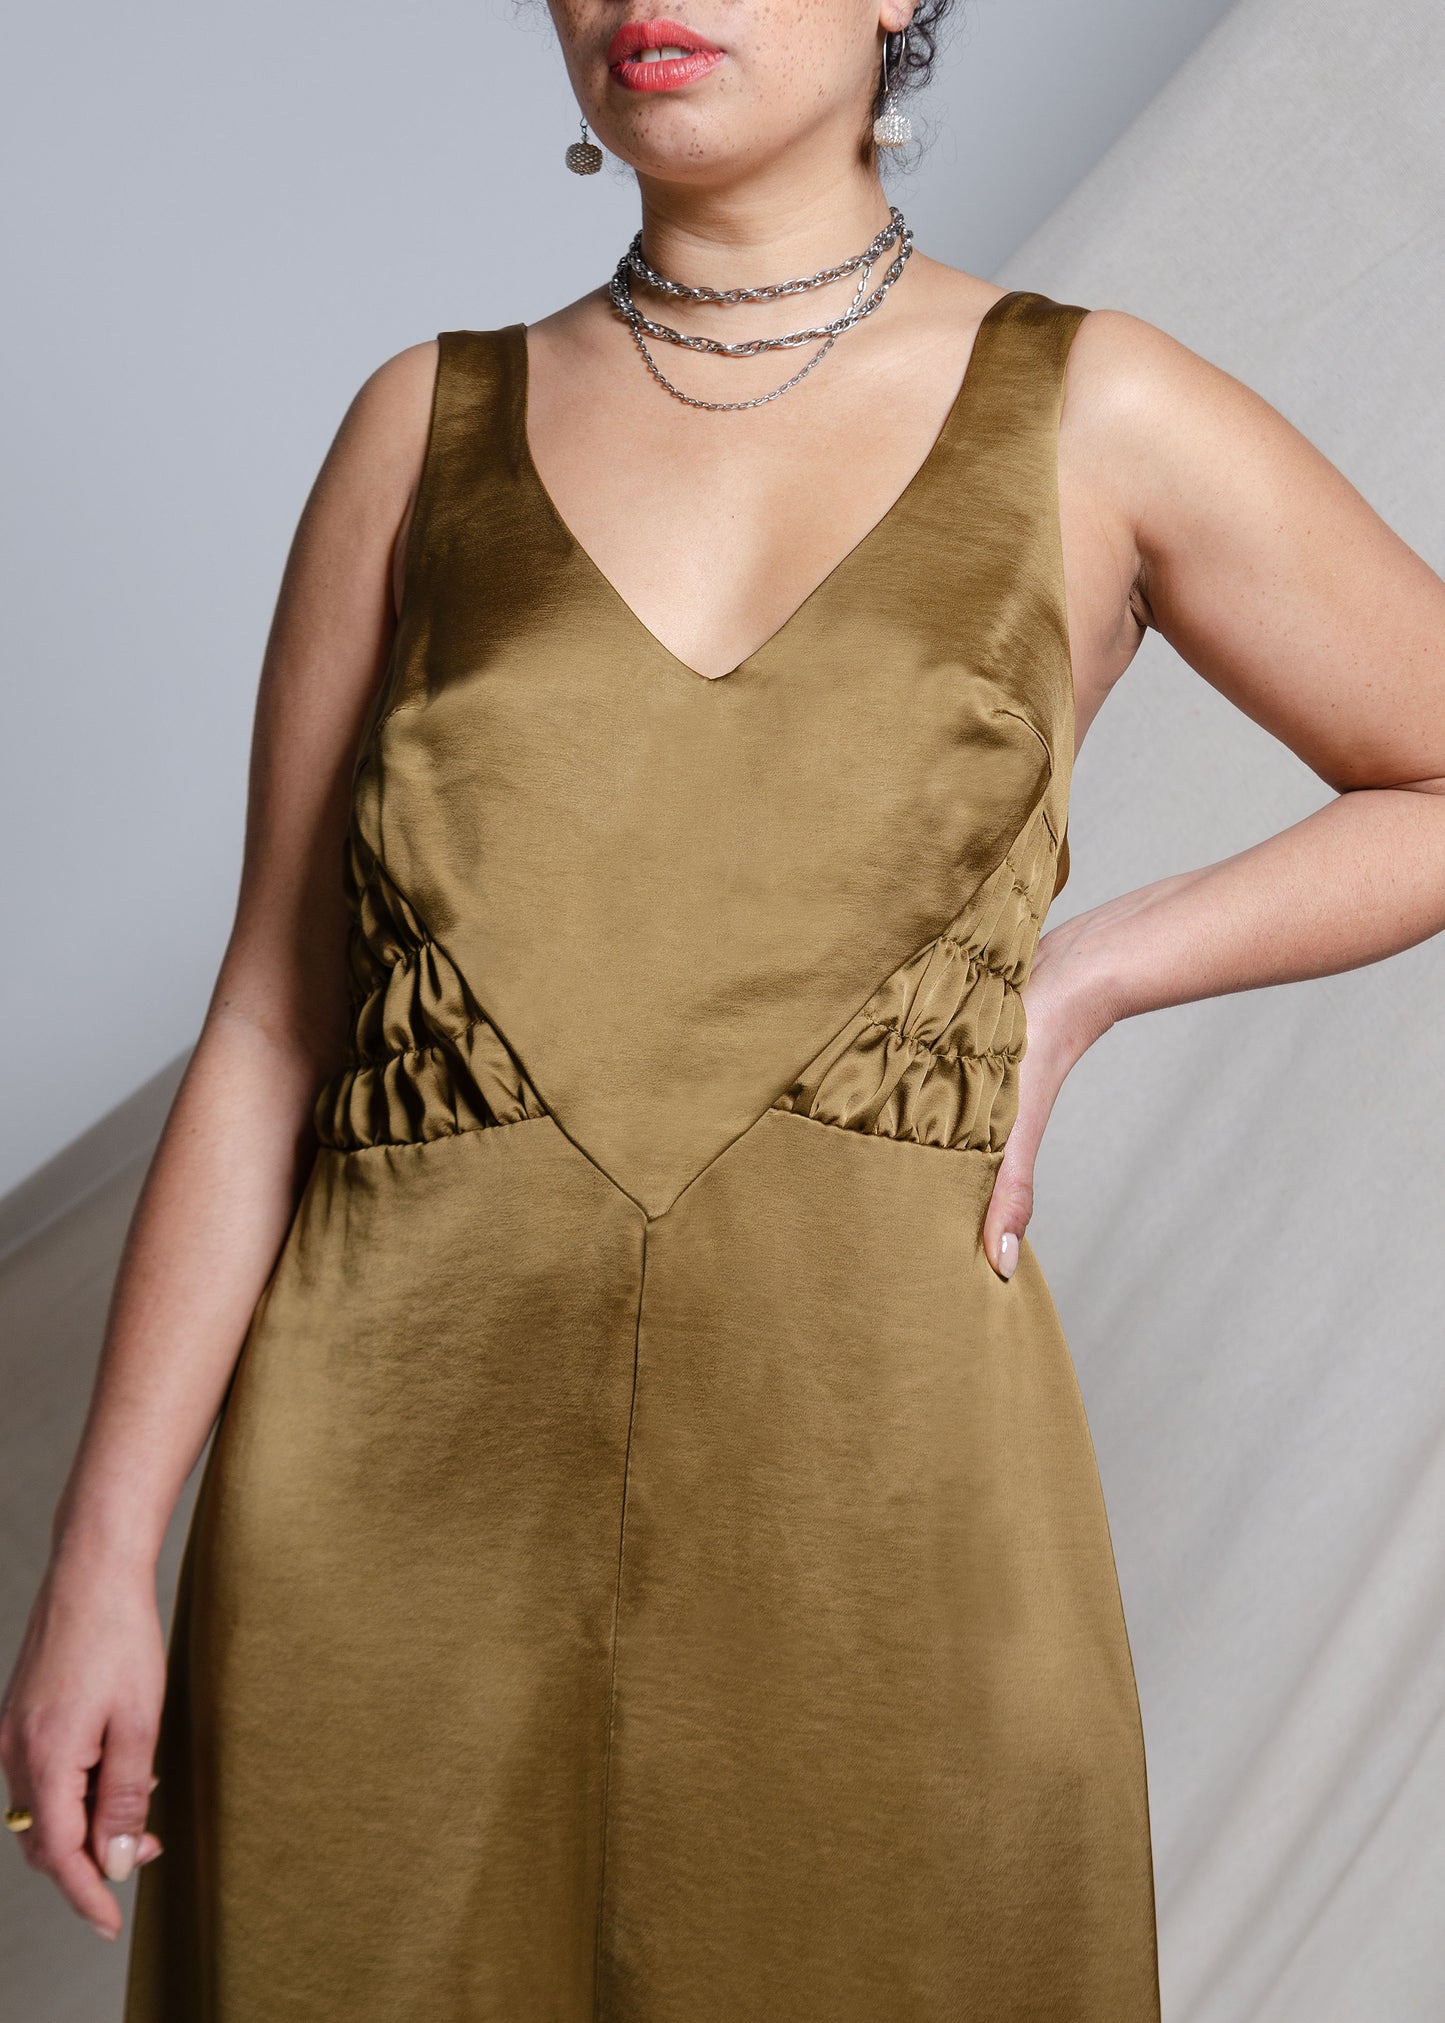 Form skimming Midi length A-line dress with gathered side panels and very low back. Khaki  green satin fabric